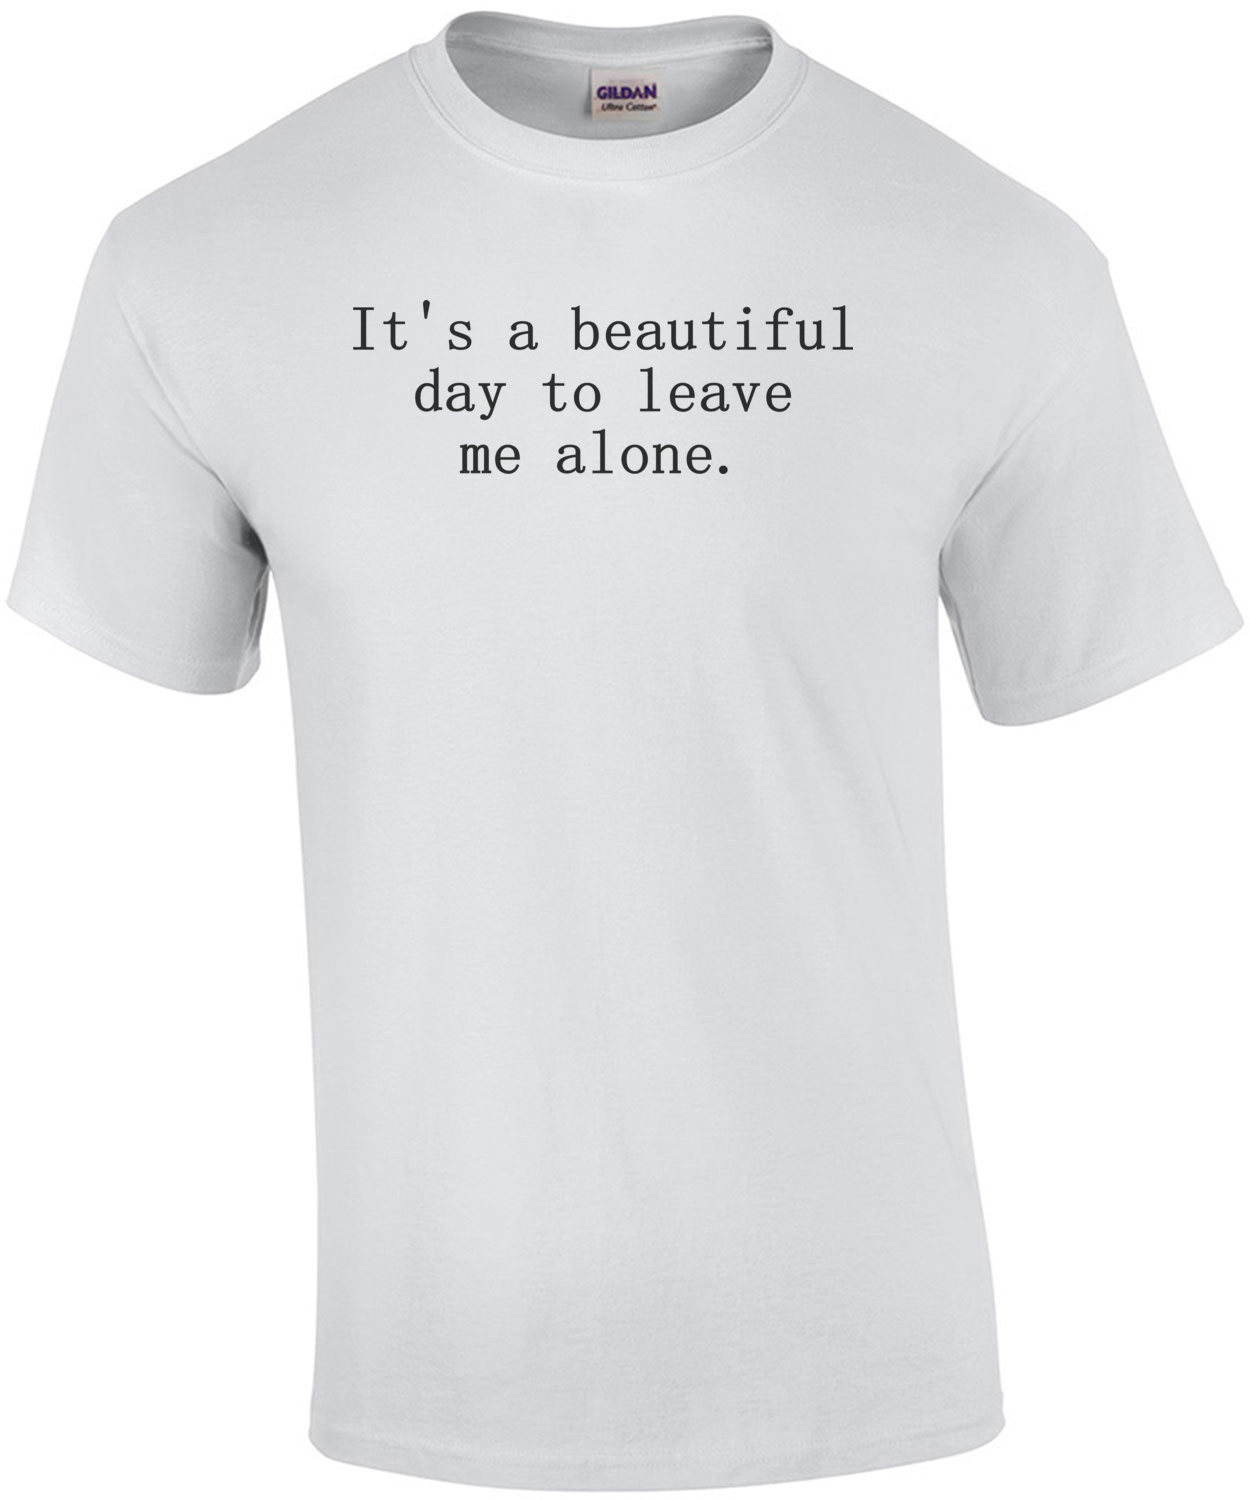 It's a beautiful day to leave me alone. Funny Sarcastic T-Shirt